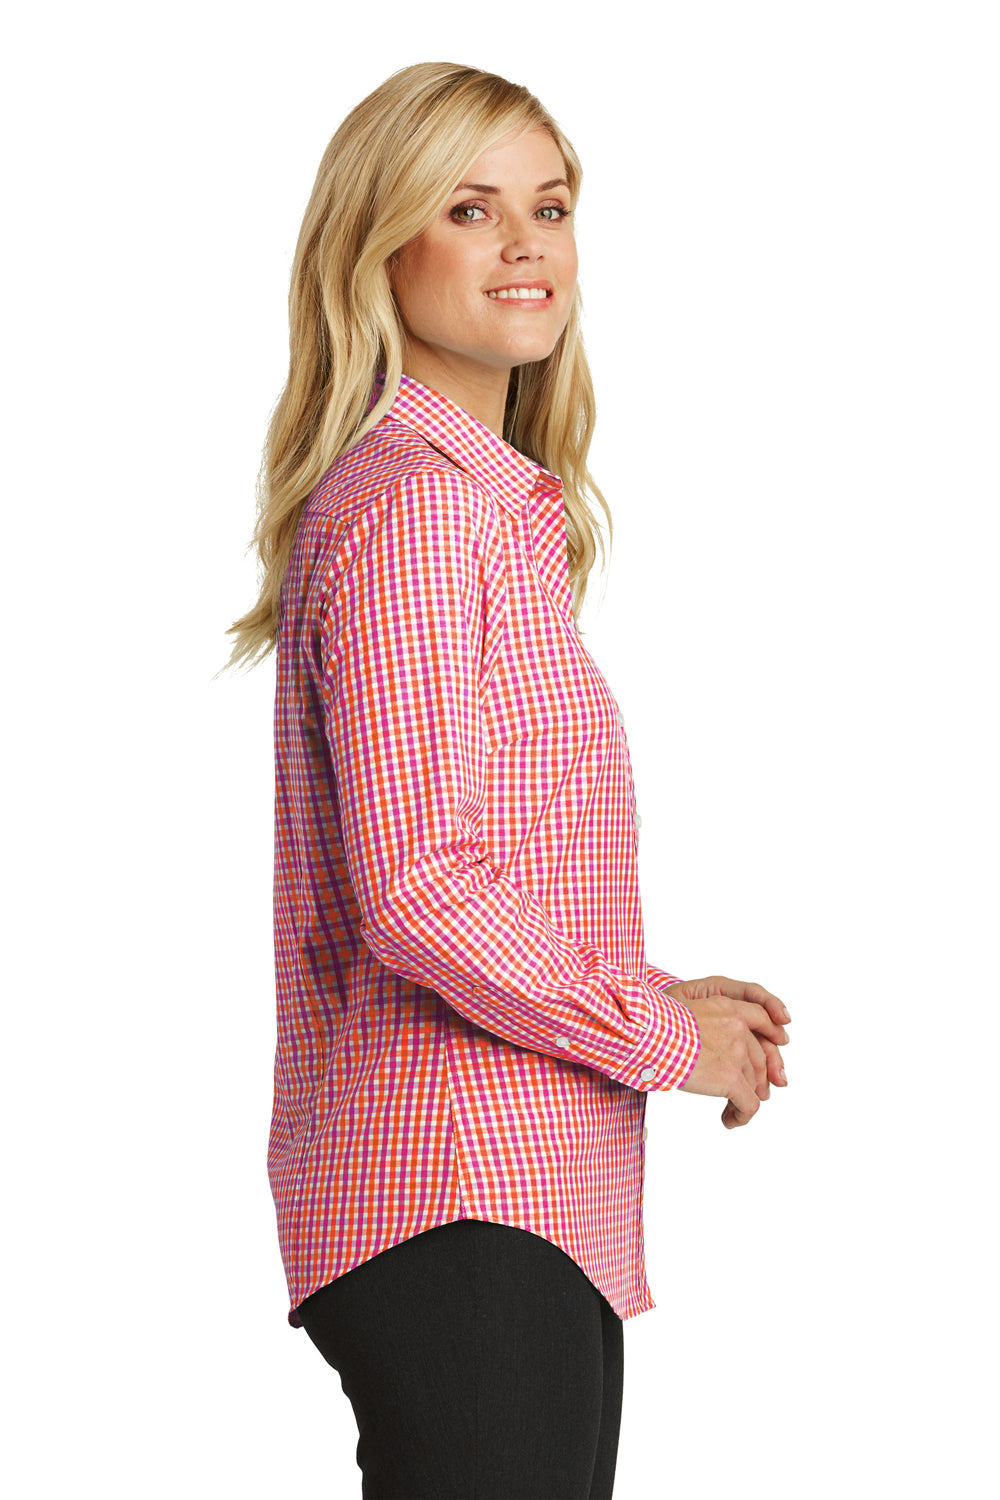 Port Authority L654 Womens Easy Care Wrinkle Resistant Long Sleeve Button Down Shirt Orange/Pink Side